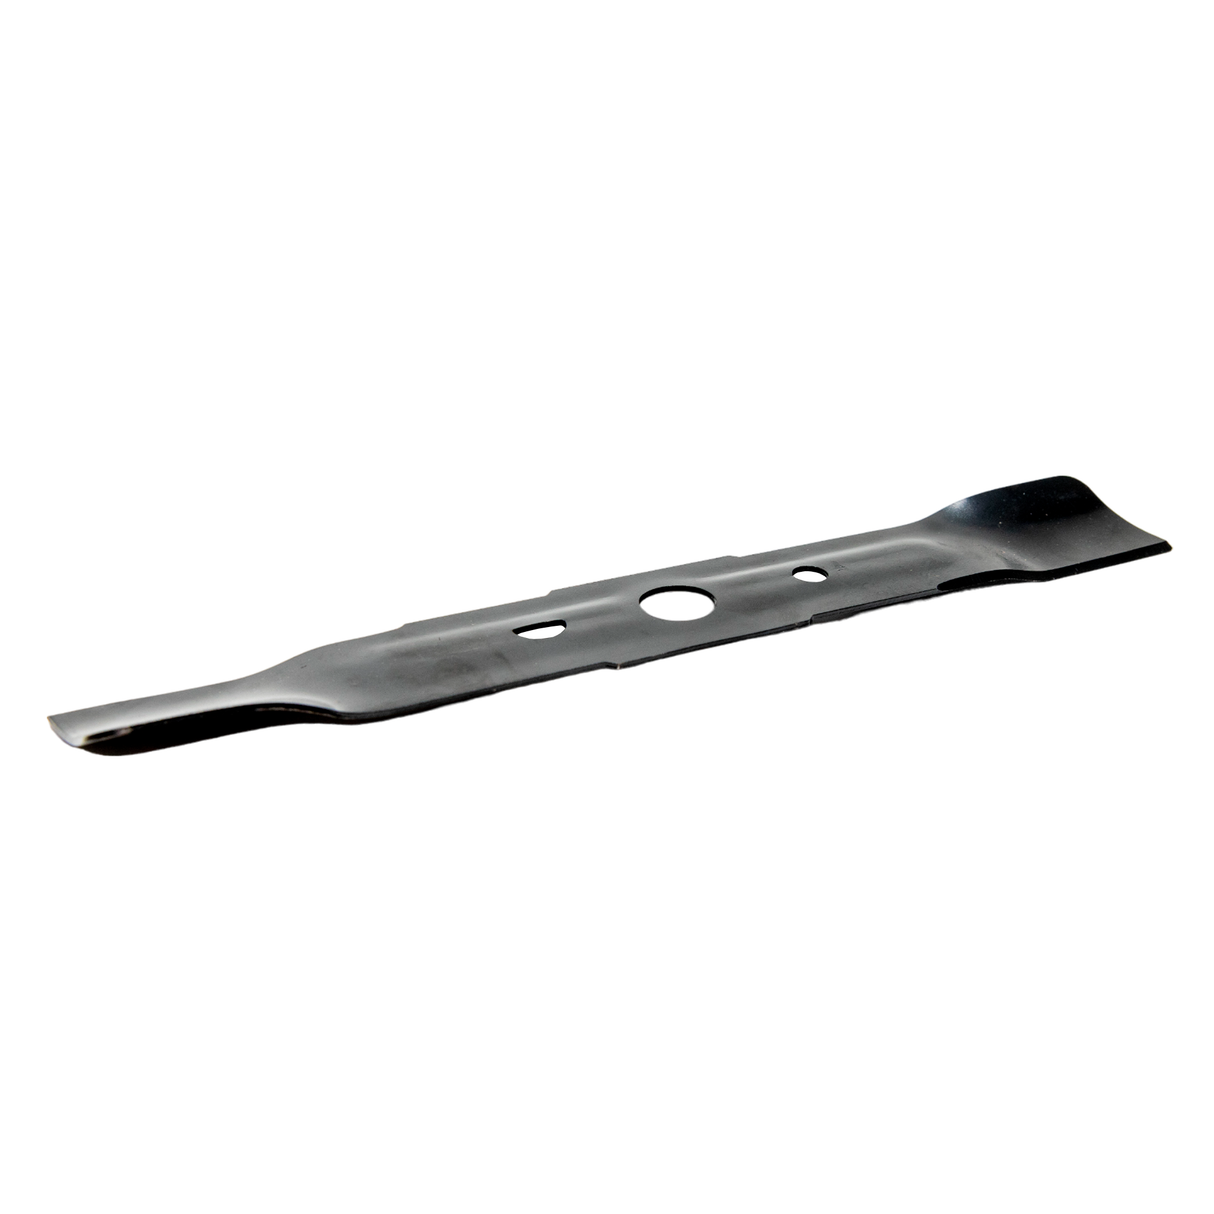 14" Replacement Lawn Mower Blade Assembly Kit